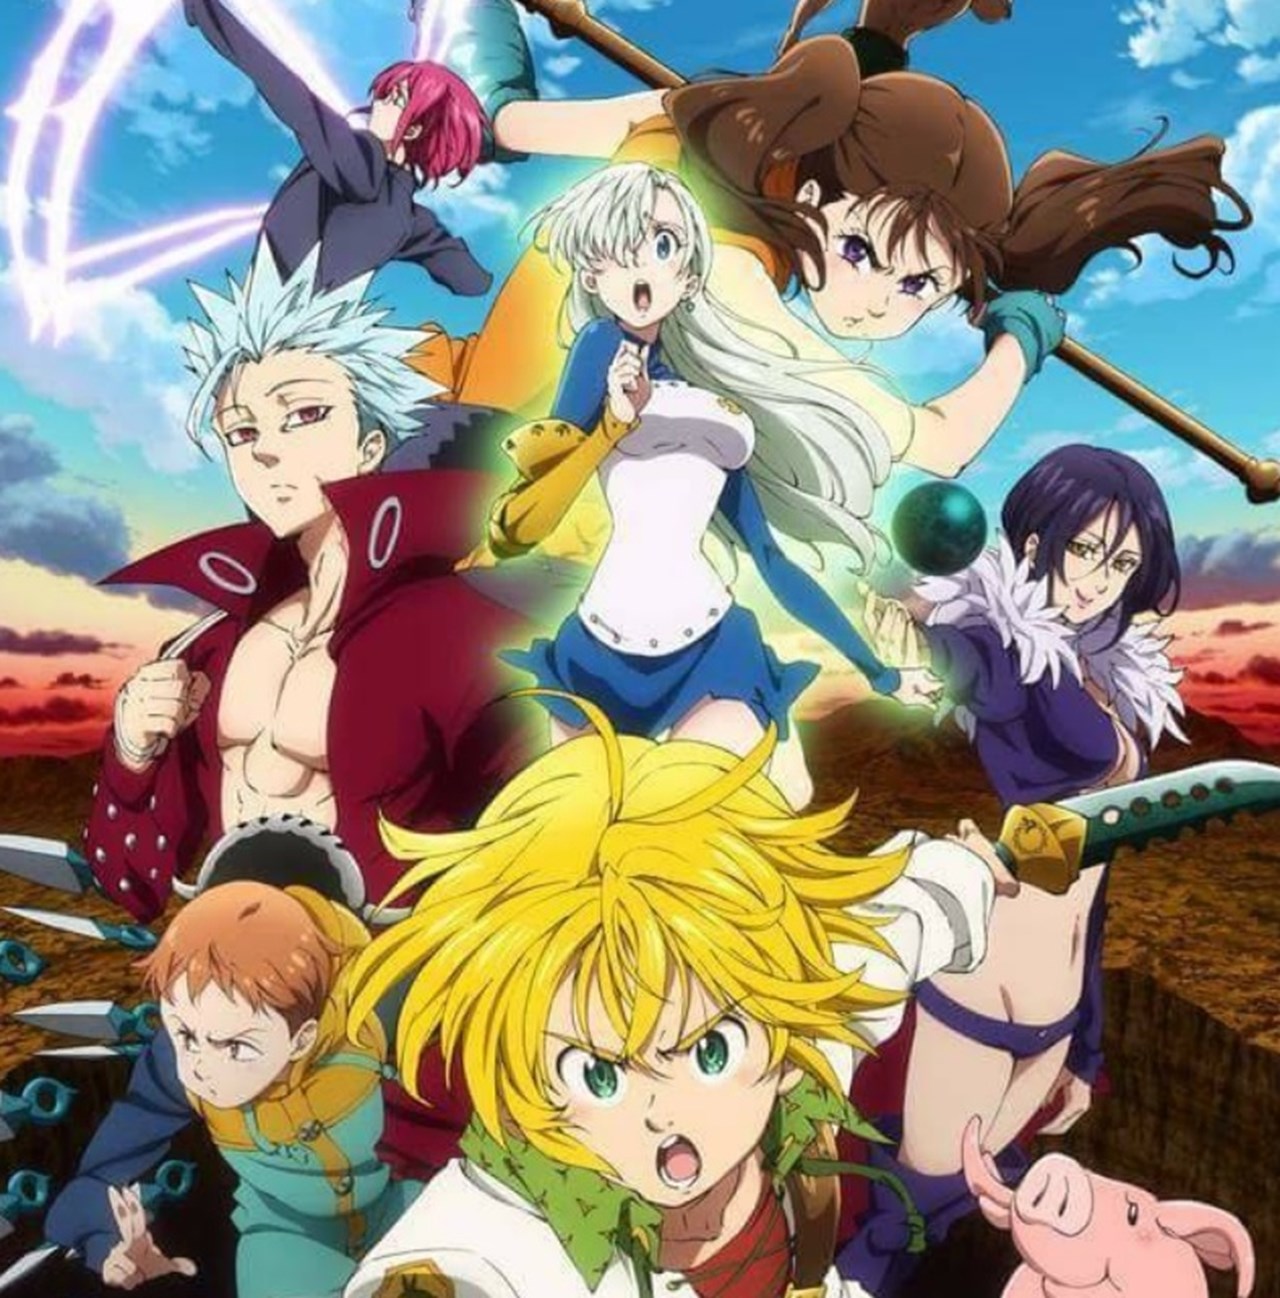 Will There Be a Season 6 of 'Seven Deadly Sins'? Is the Anime Over